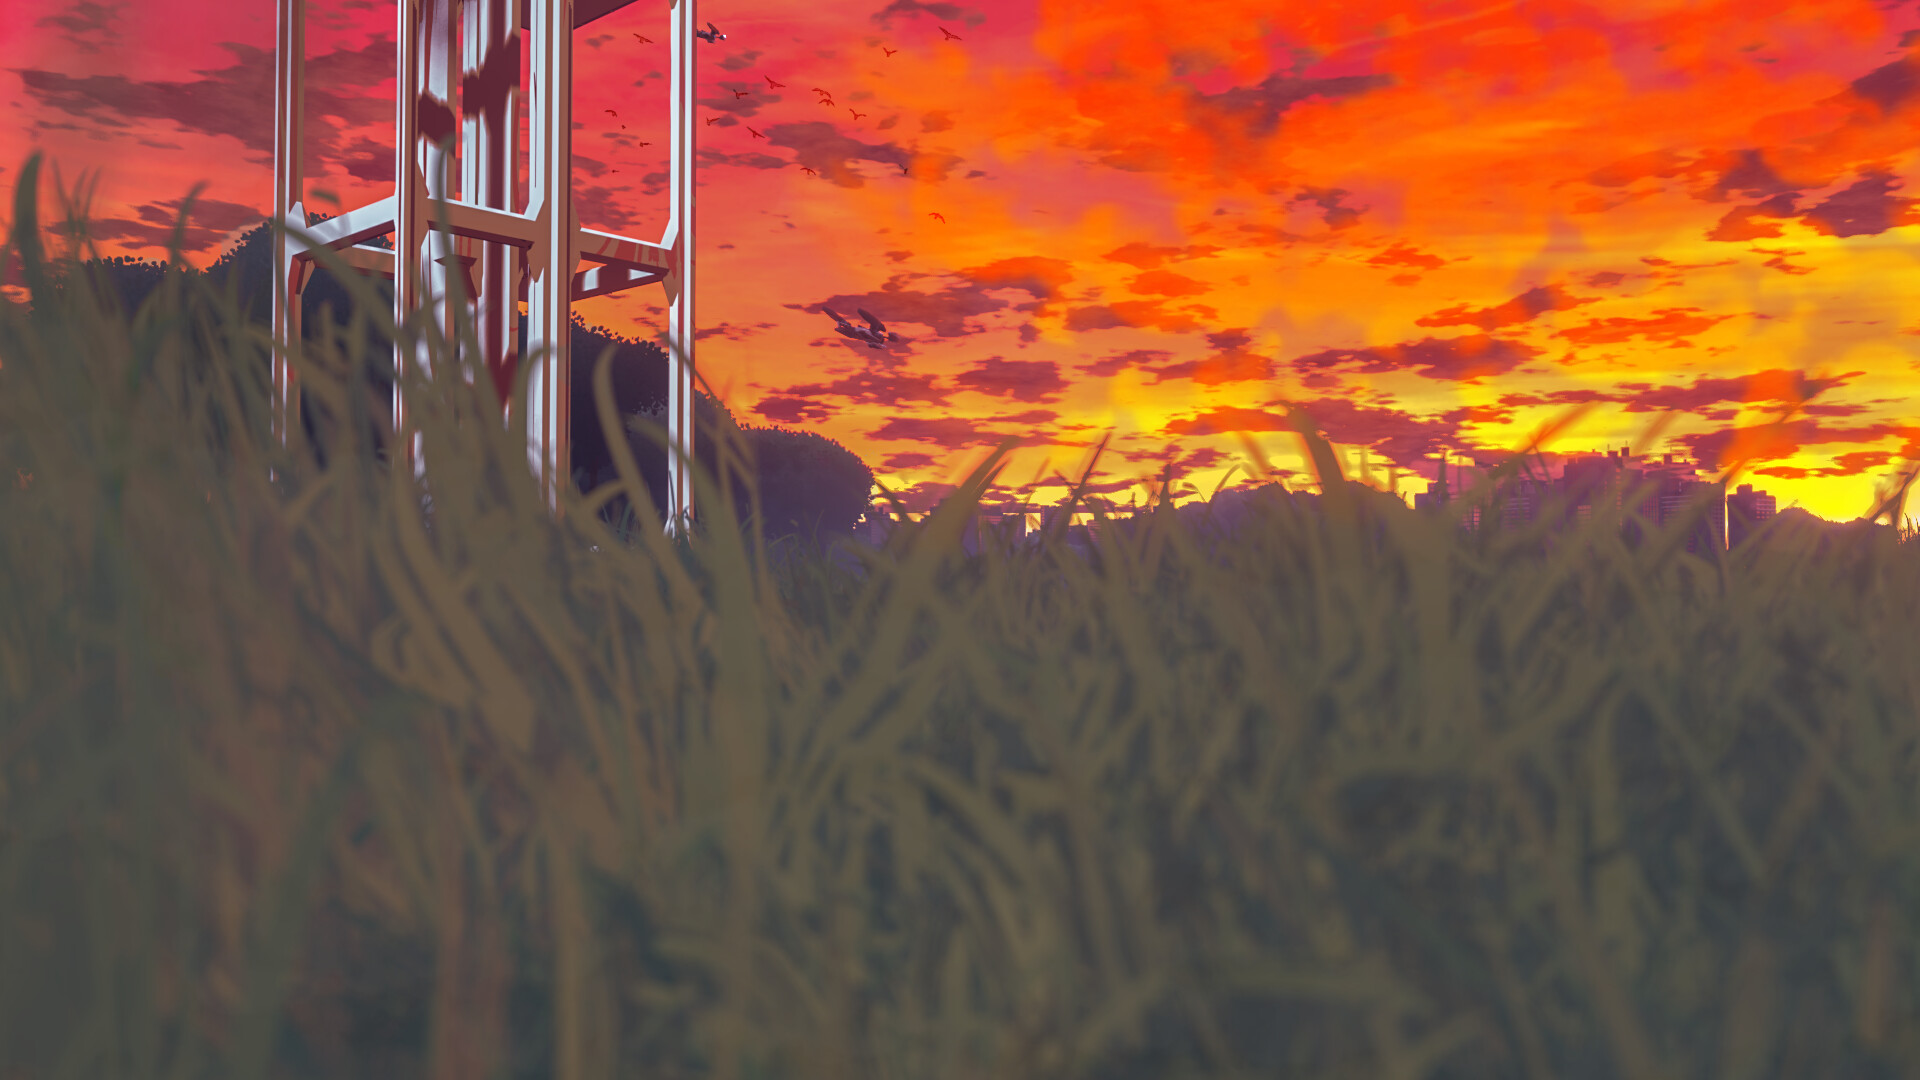 Lexica - Fantastic Anime Sunset Rural Scenery, wallpaper, Beautiful  lighting, Dreamy, Ethereal Sky, Vibrant